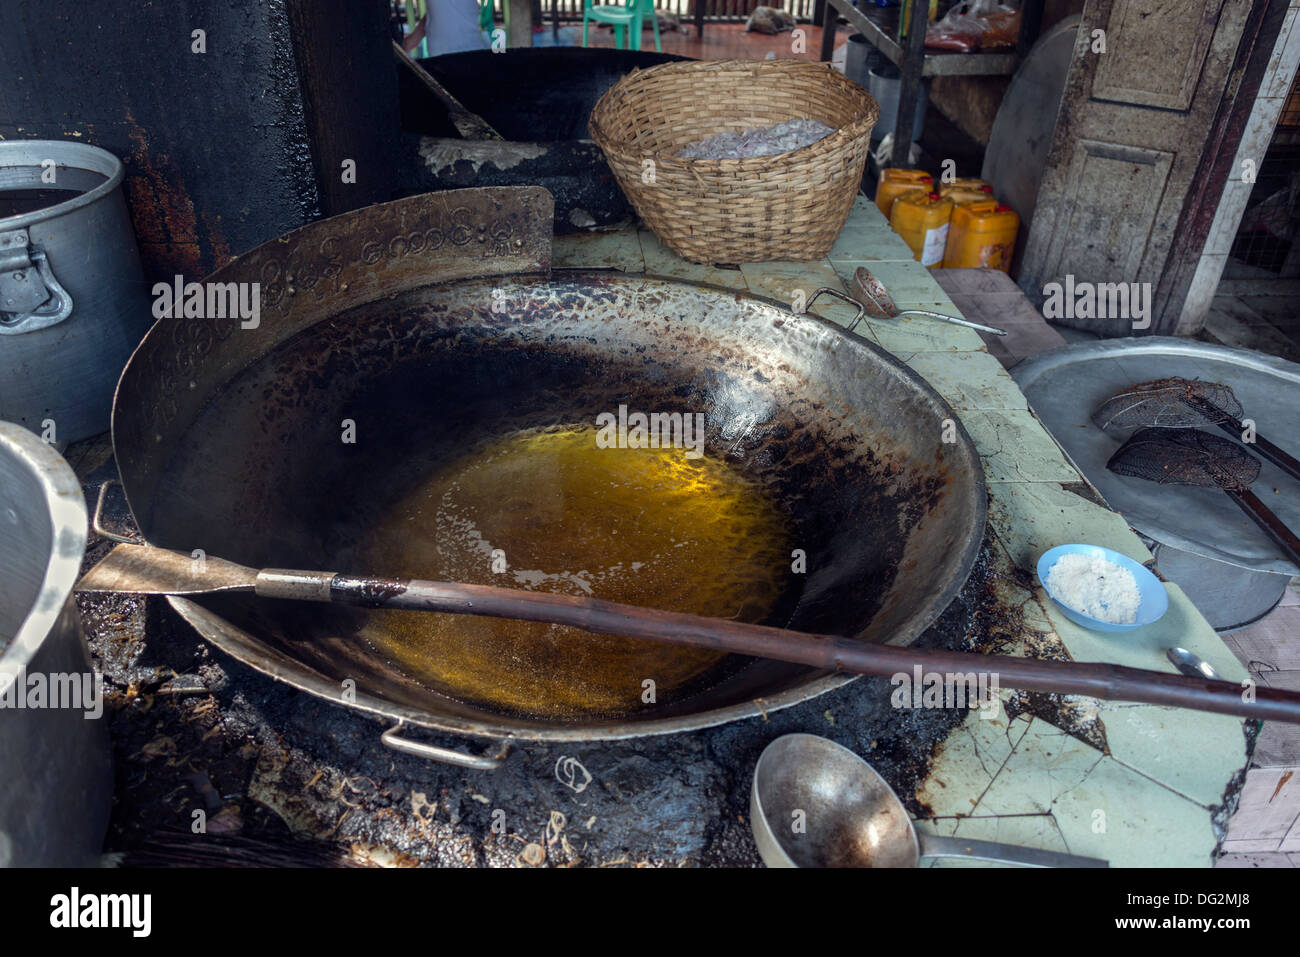 https://c8.alamy.com/comp/DG2MJ8/traditional-cooking-implements-sitting-over-wood-fire-for-preparing-DG2MJ8.jpg